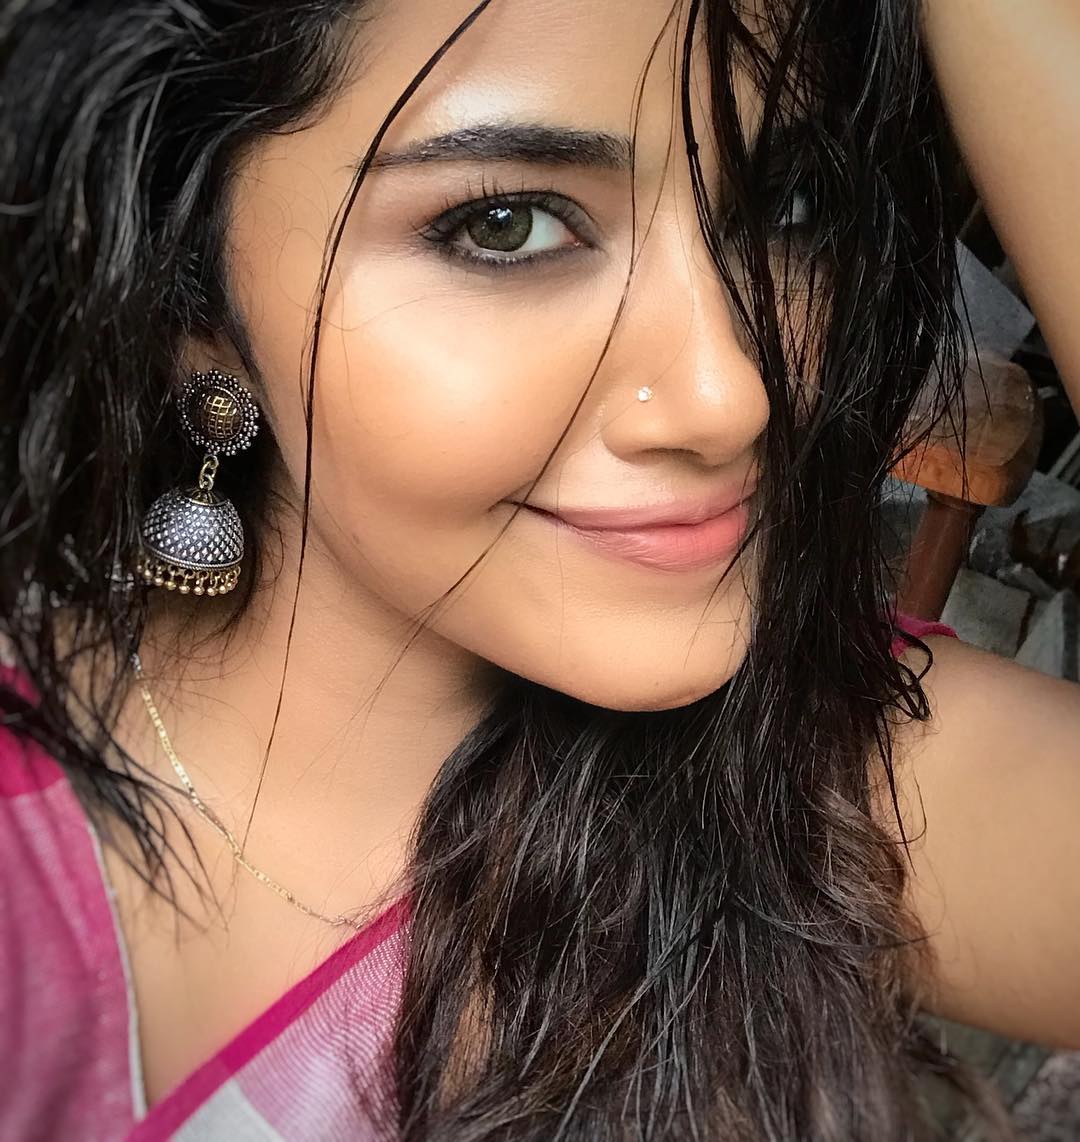 
Anupama Parameswaran is NOT against Casting Couch
